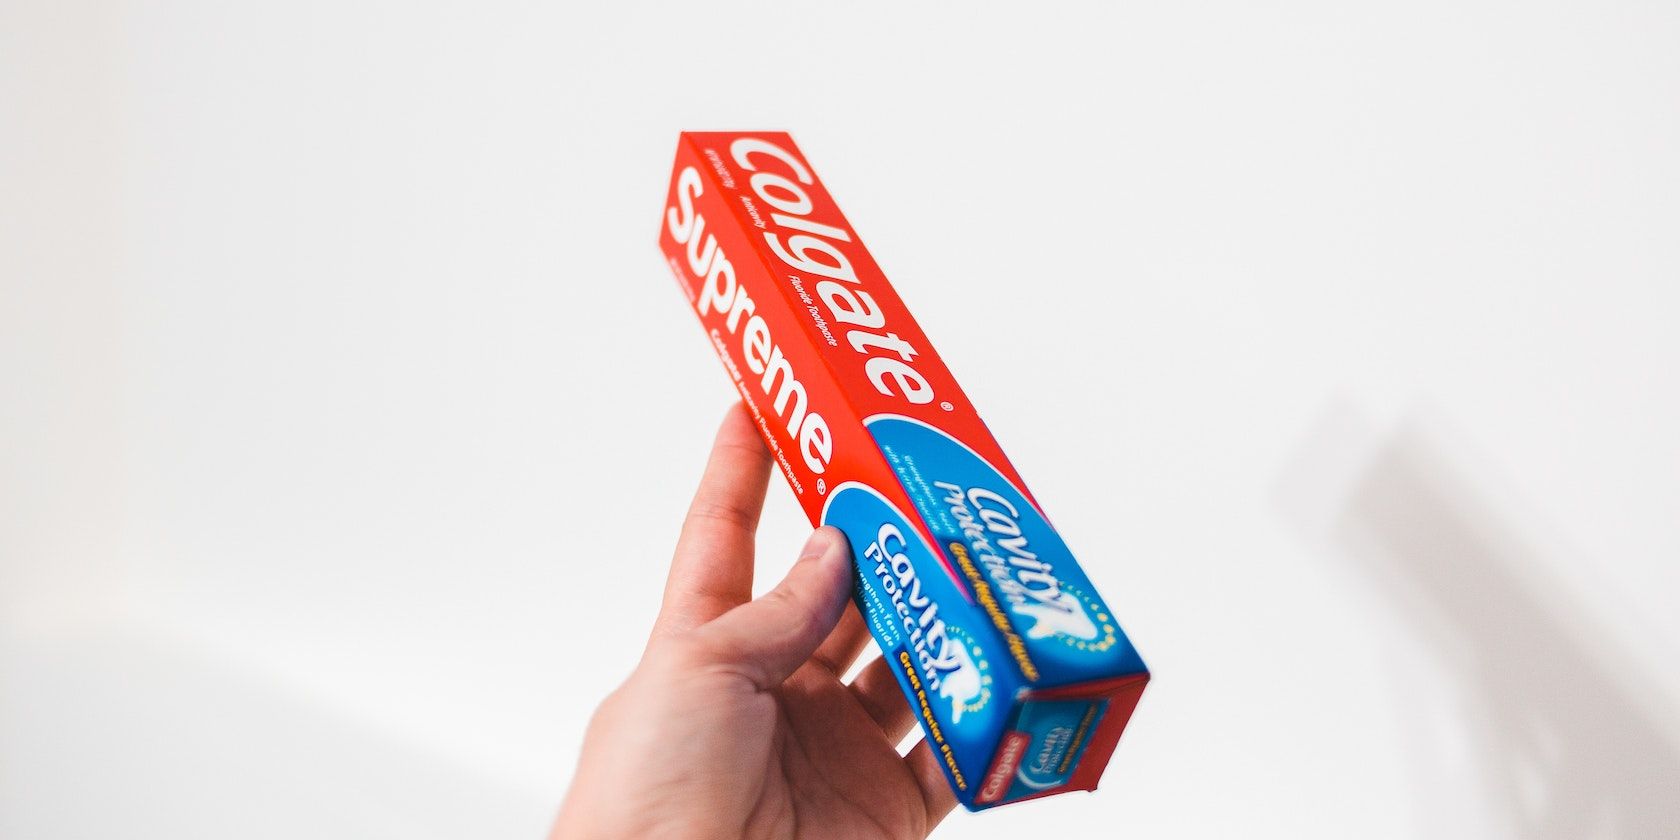 A hand holding a Colgate toothpaste box